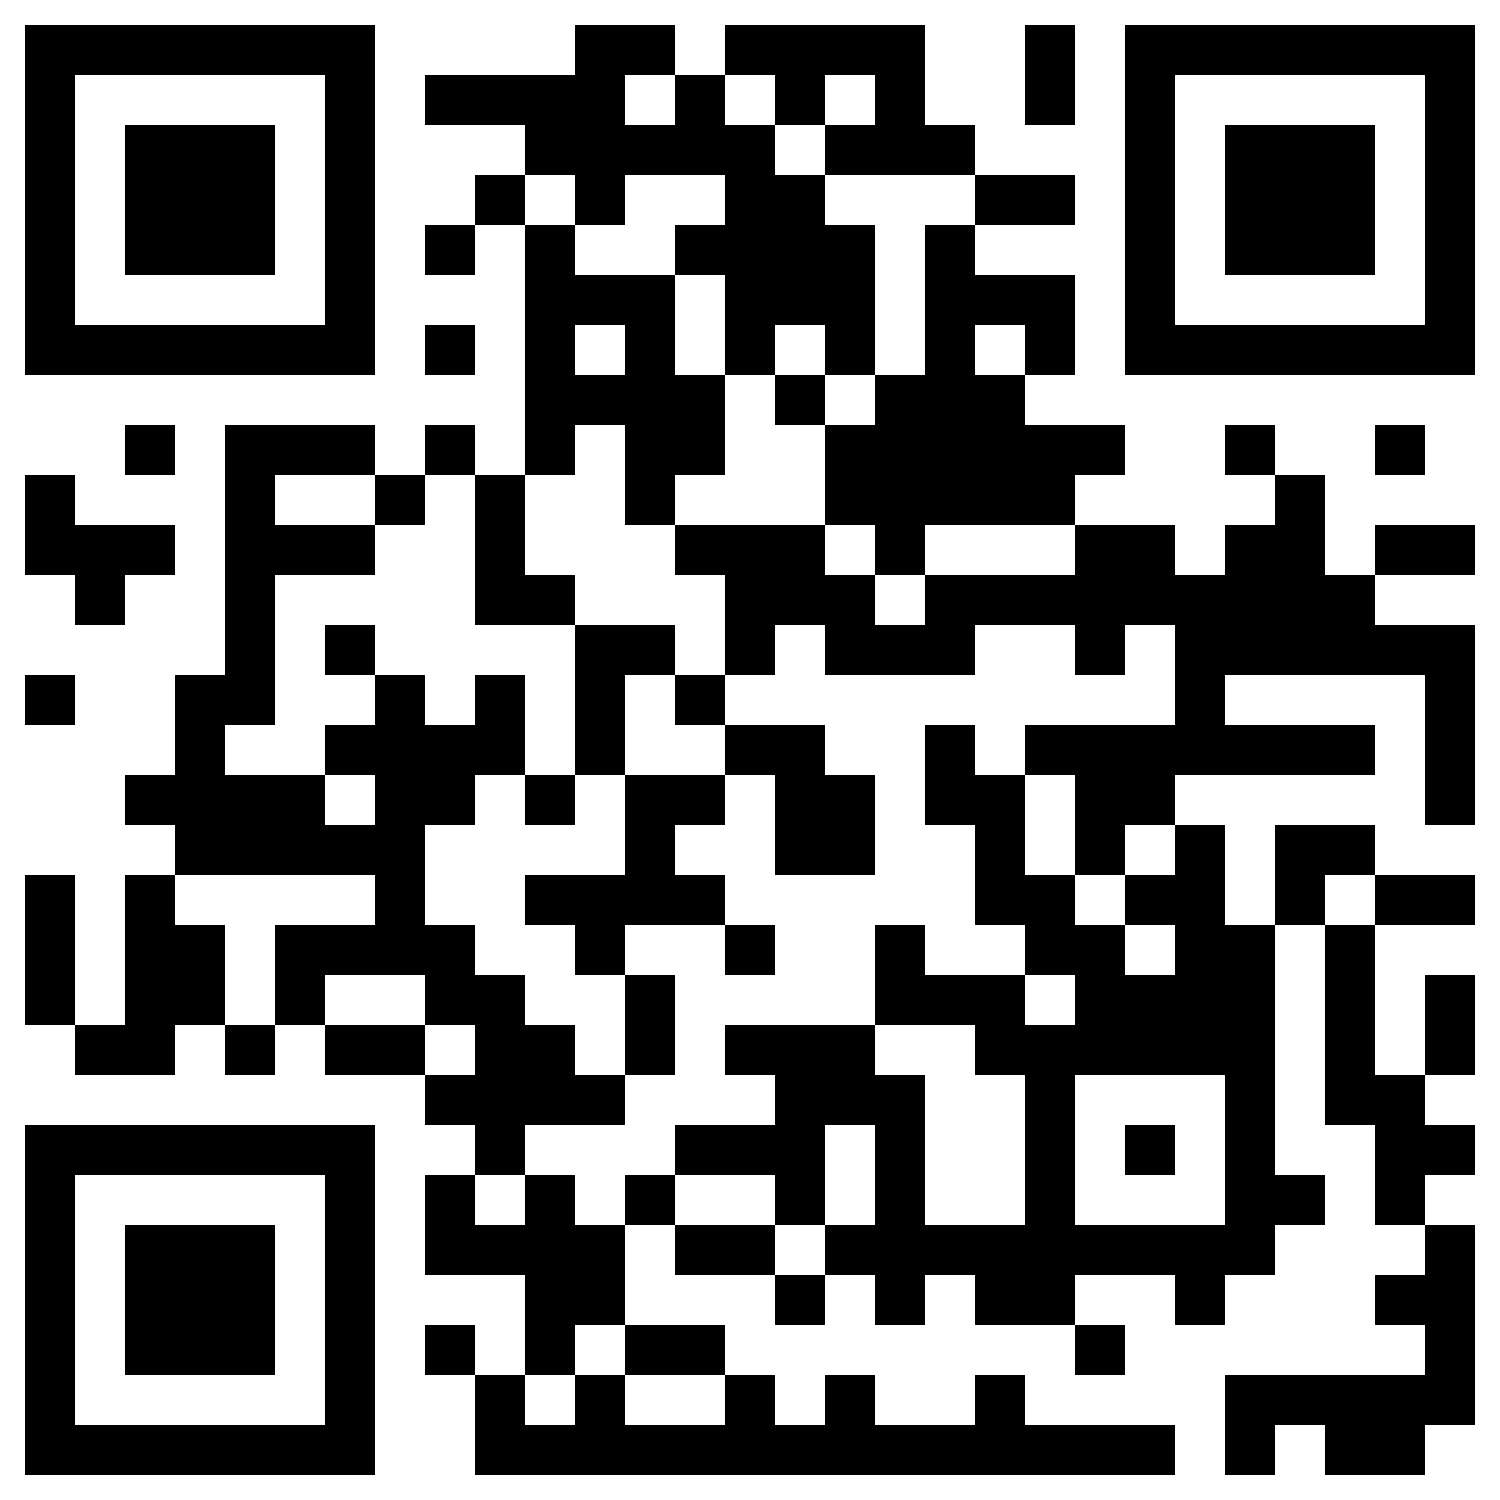 qrcode_23702096_.png picture